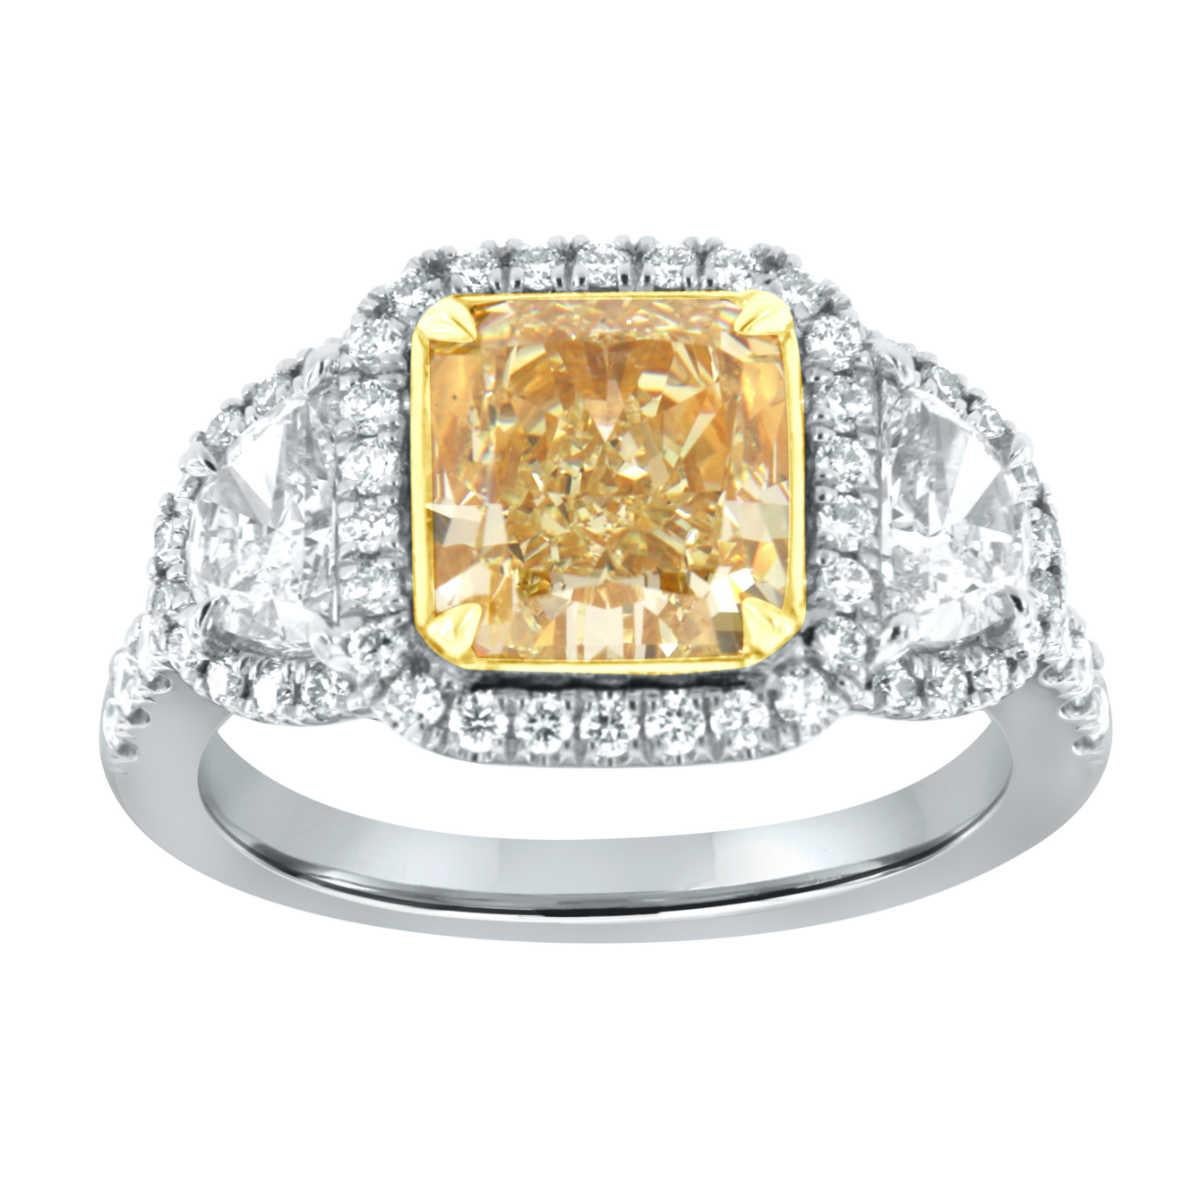 This spectacular Platinum and 18k Yellow gold ring features a 3.04 Carat Square Cushion nearly flawless Yellow diamond GIA certified encircled by a halo of perfectly matched diamonds and flanked by two half-moon diamonds in weight of 0.71 carats.